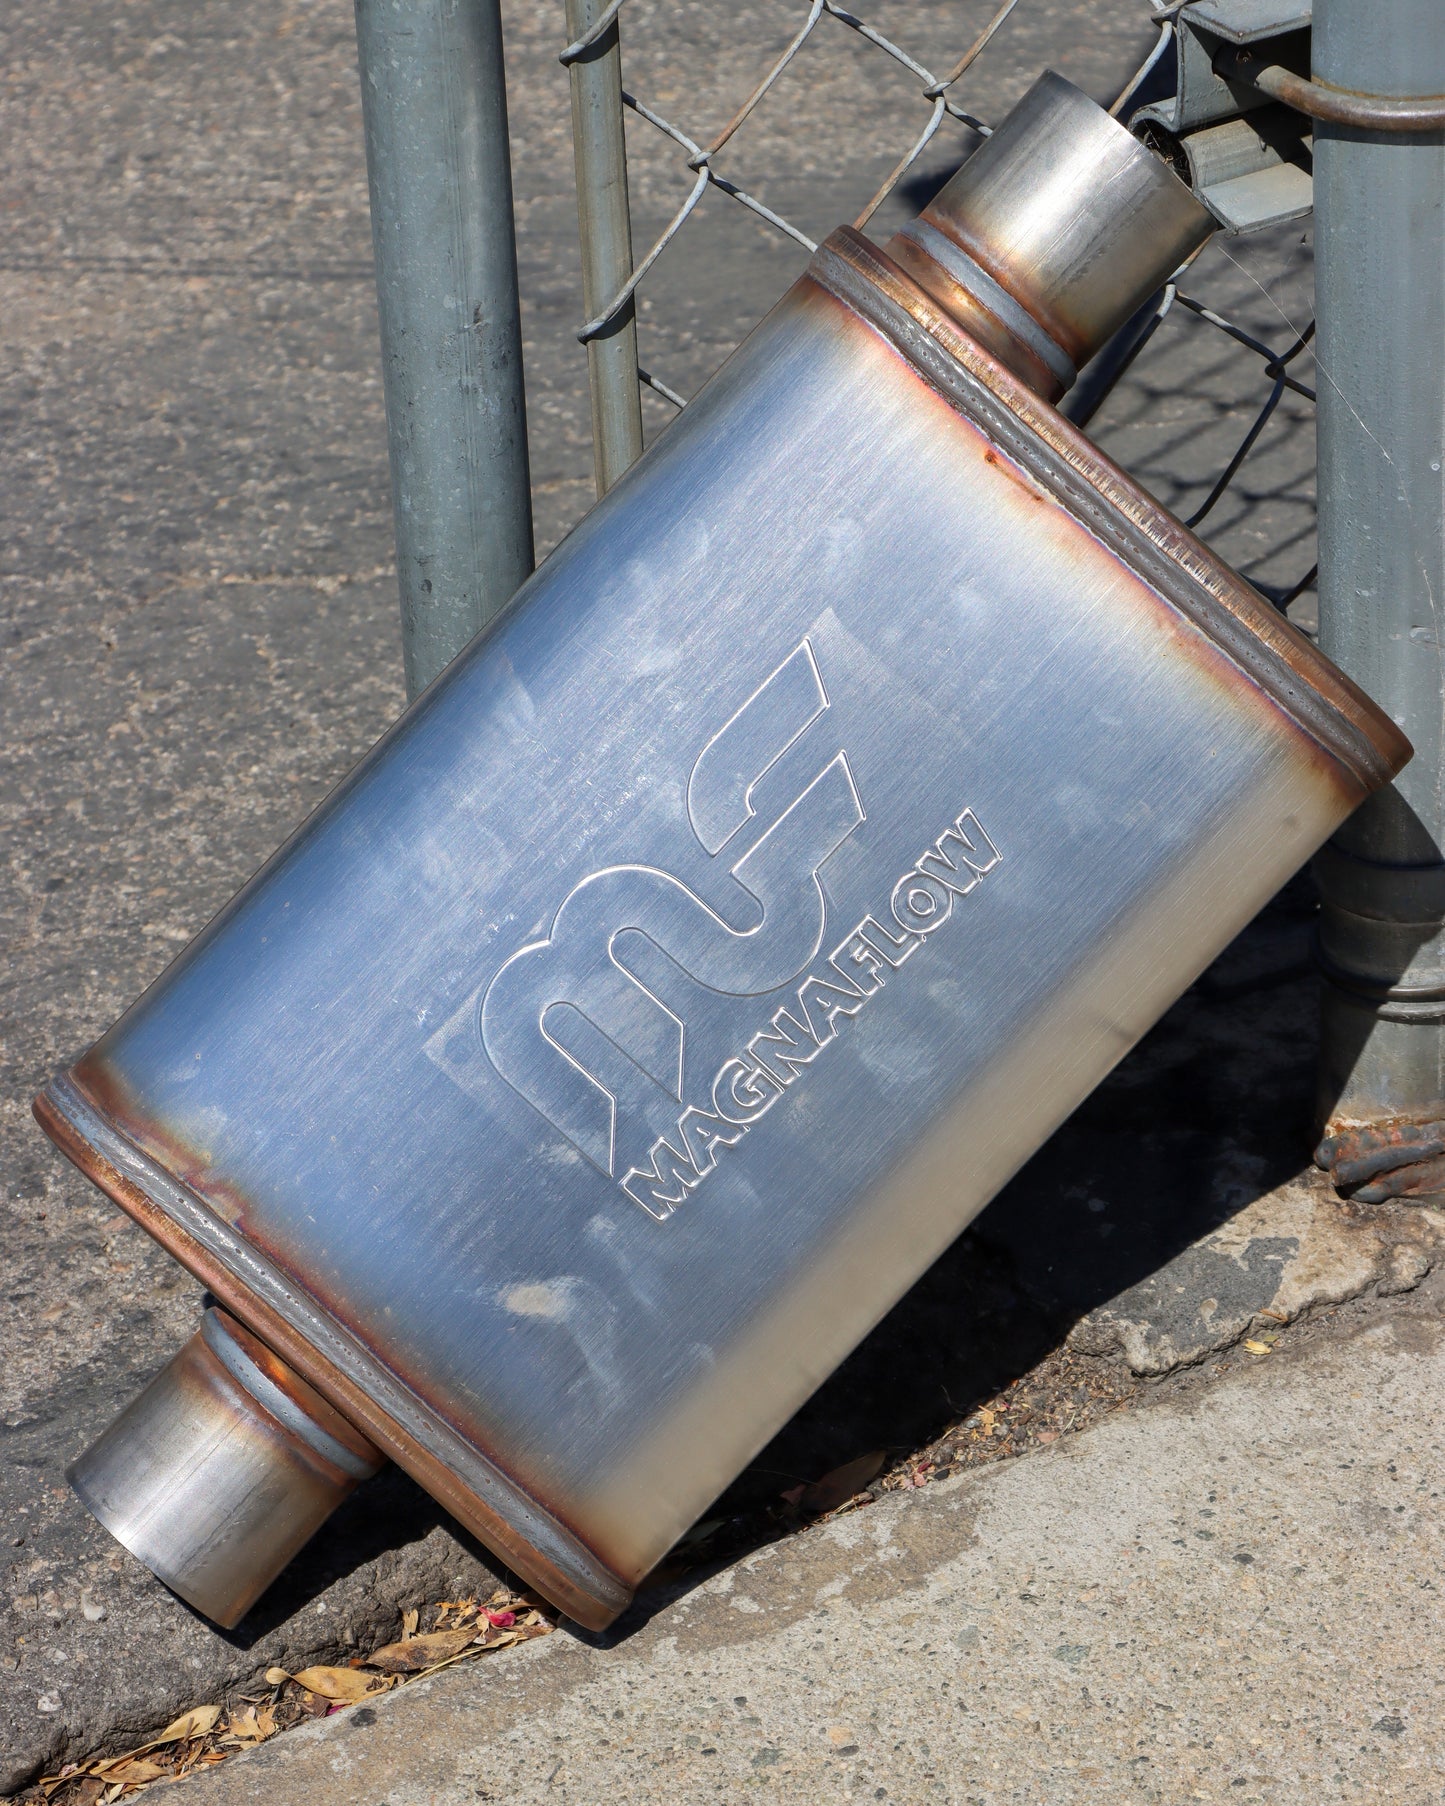 Magnaflow muffler leaning up against a chain link fence.